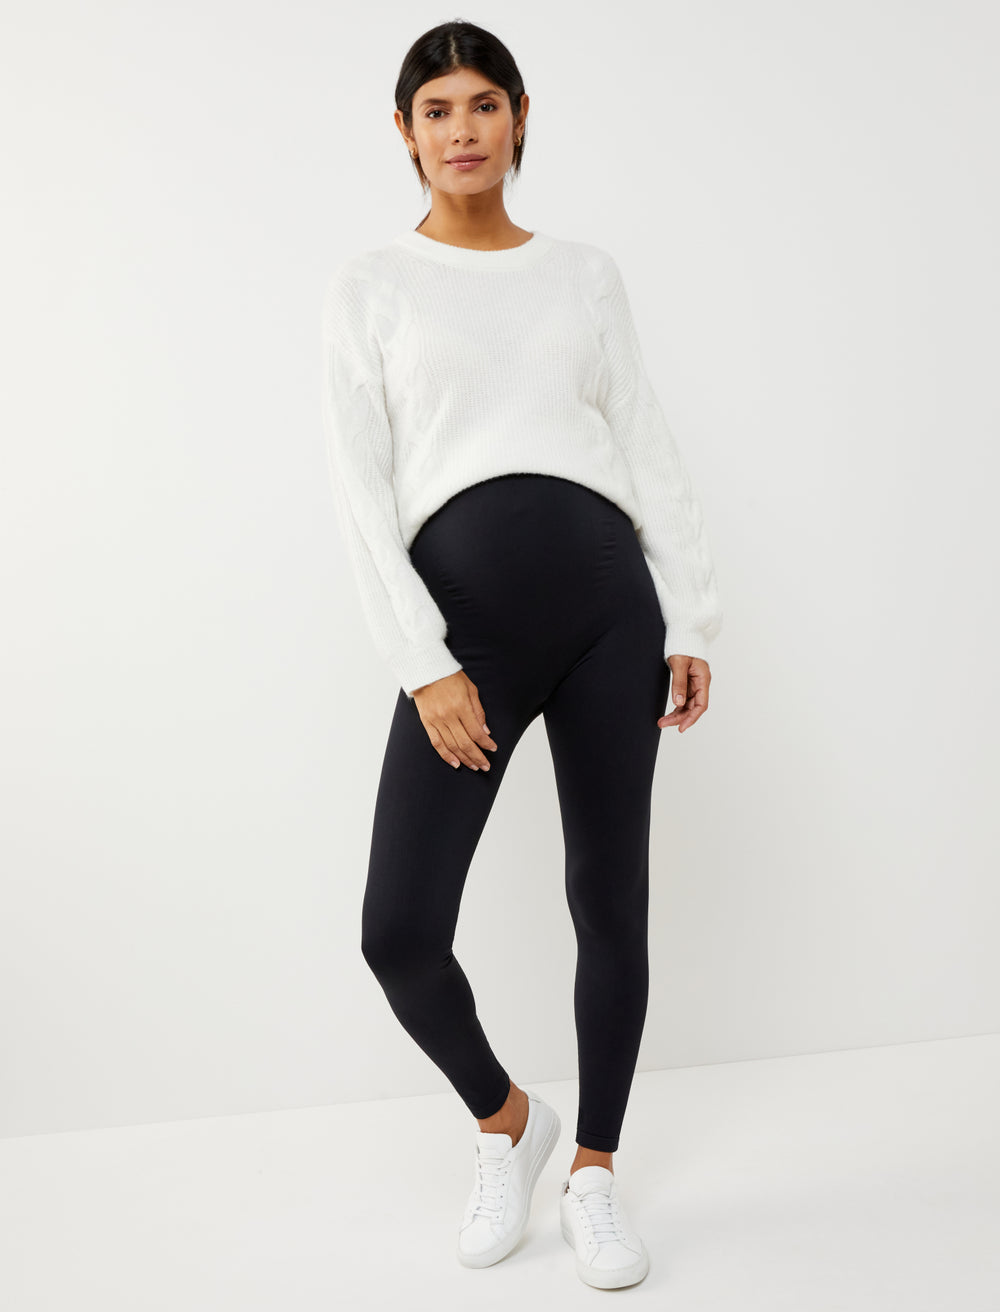 brrr°® Triple Chill Cooling Seamless Maternity Leggings - A Pea In